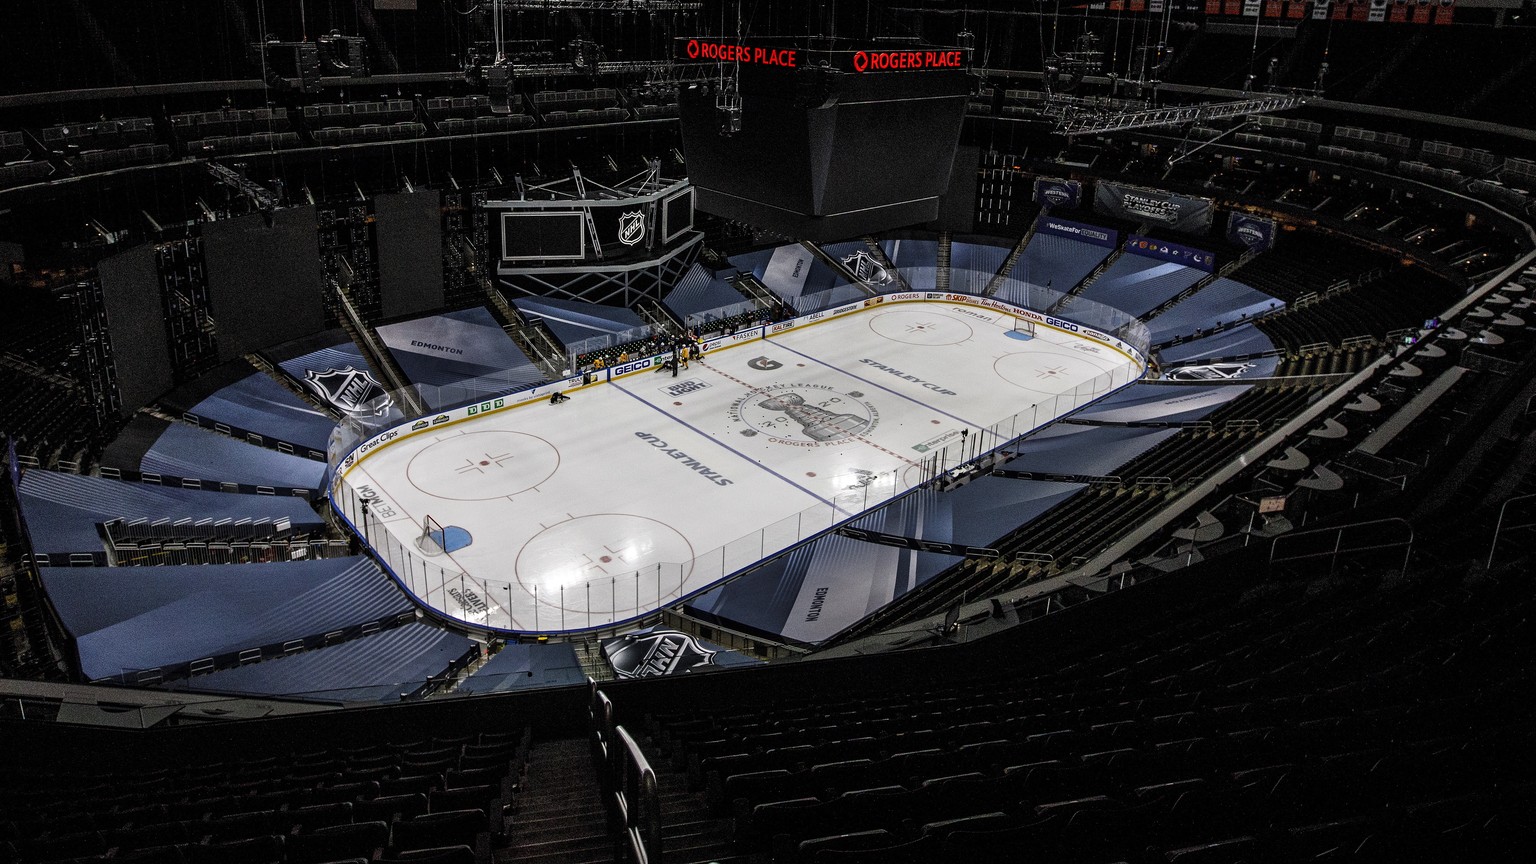 Players prepare for a skate at the NHL hockey playoffs venue in Edmonton, Alberta, Friday, Aug. 28, 2020. Boston Bruins captain Zdeno Chara hopes players and fans take a step back to pause and reflect ...